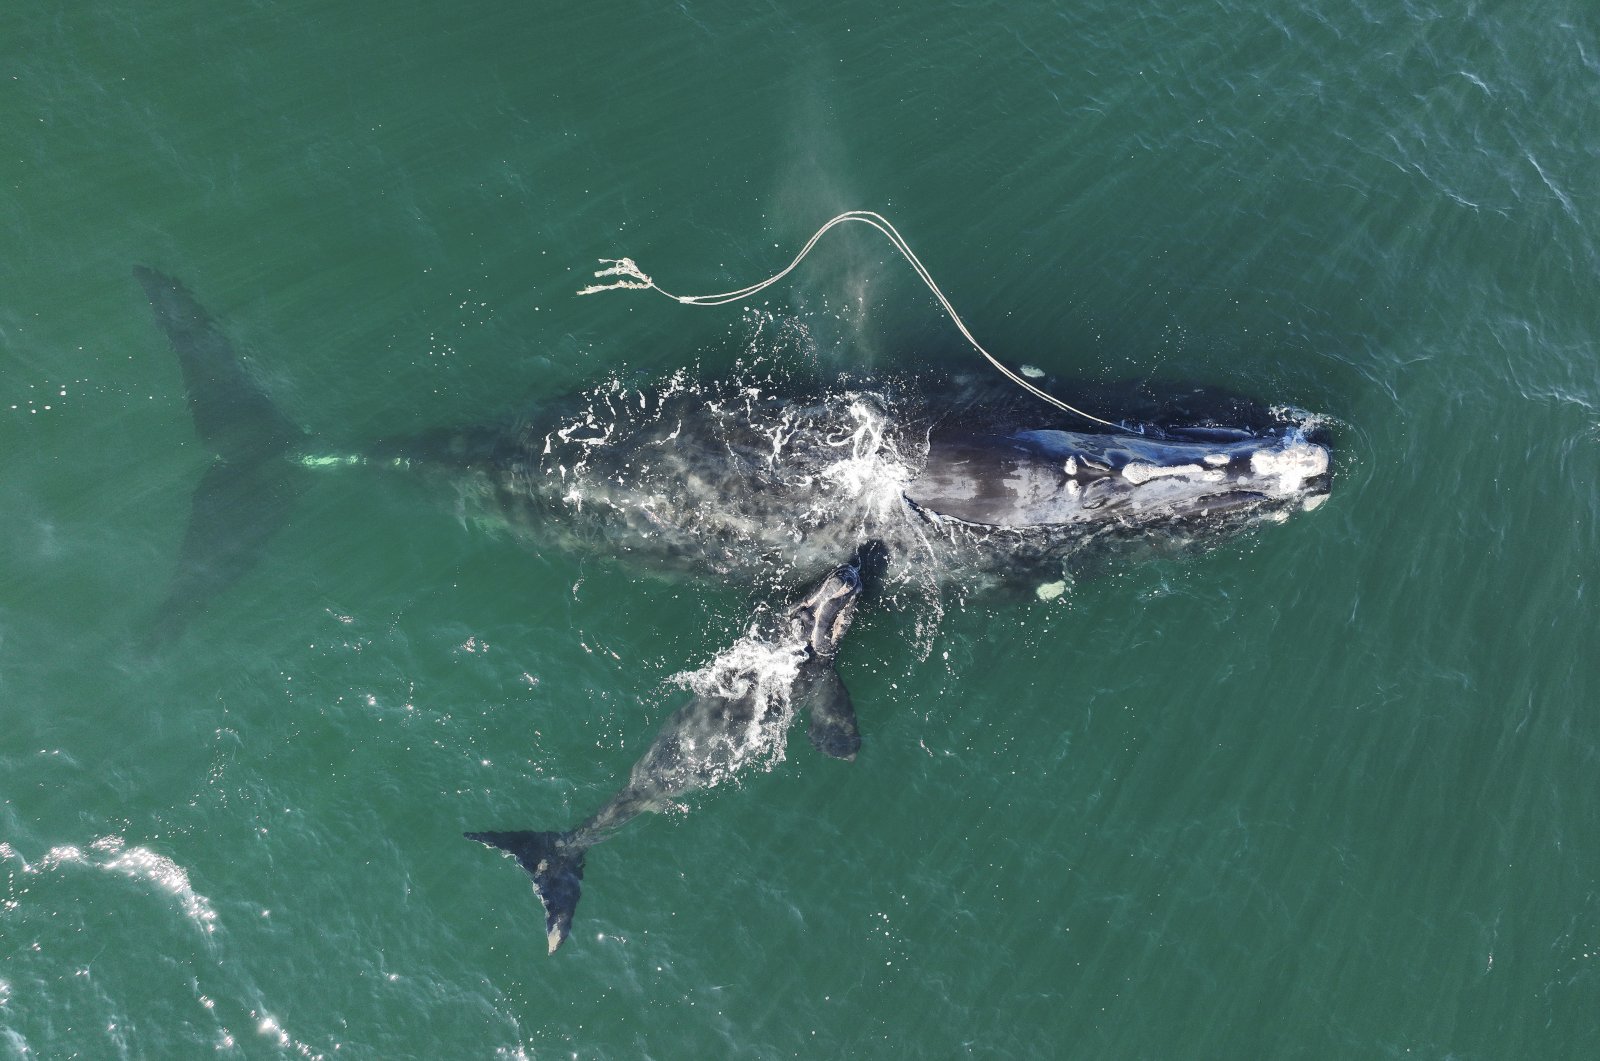 This Dec. 2, 2021, file photo provided by the Georgia Department of Natural Resources shows an endangered North Atlantic right whale entangled in a fishing rope being sighted with a newborn calf in waters near Cumberland Island, Georgia, U.S. (Georgia Department of Natural Resources/NOAA Permit #20556 via AP)